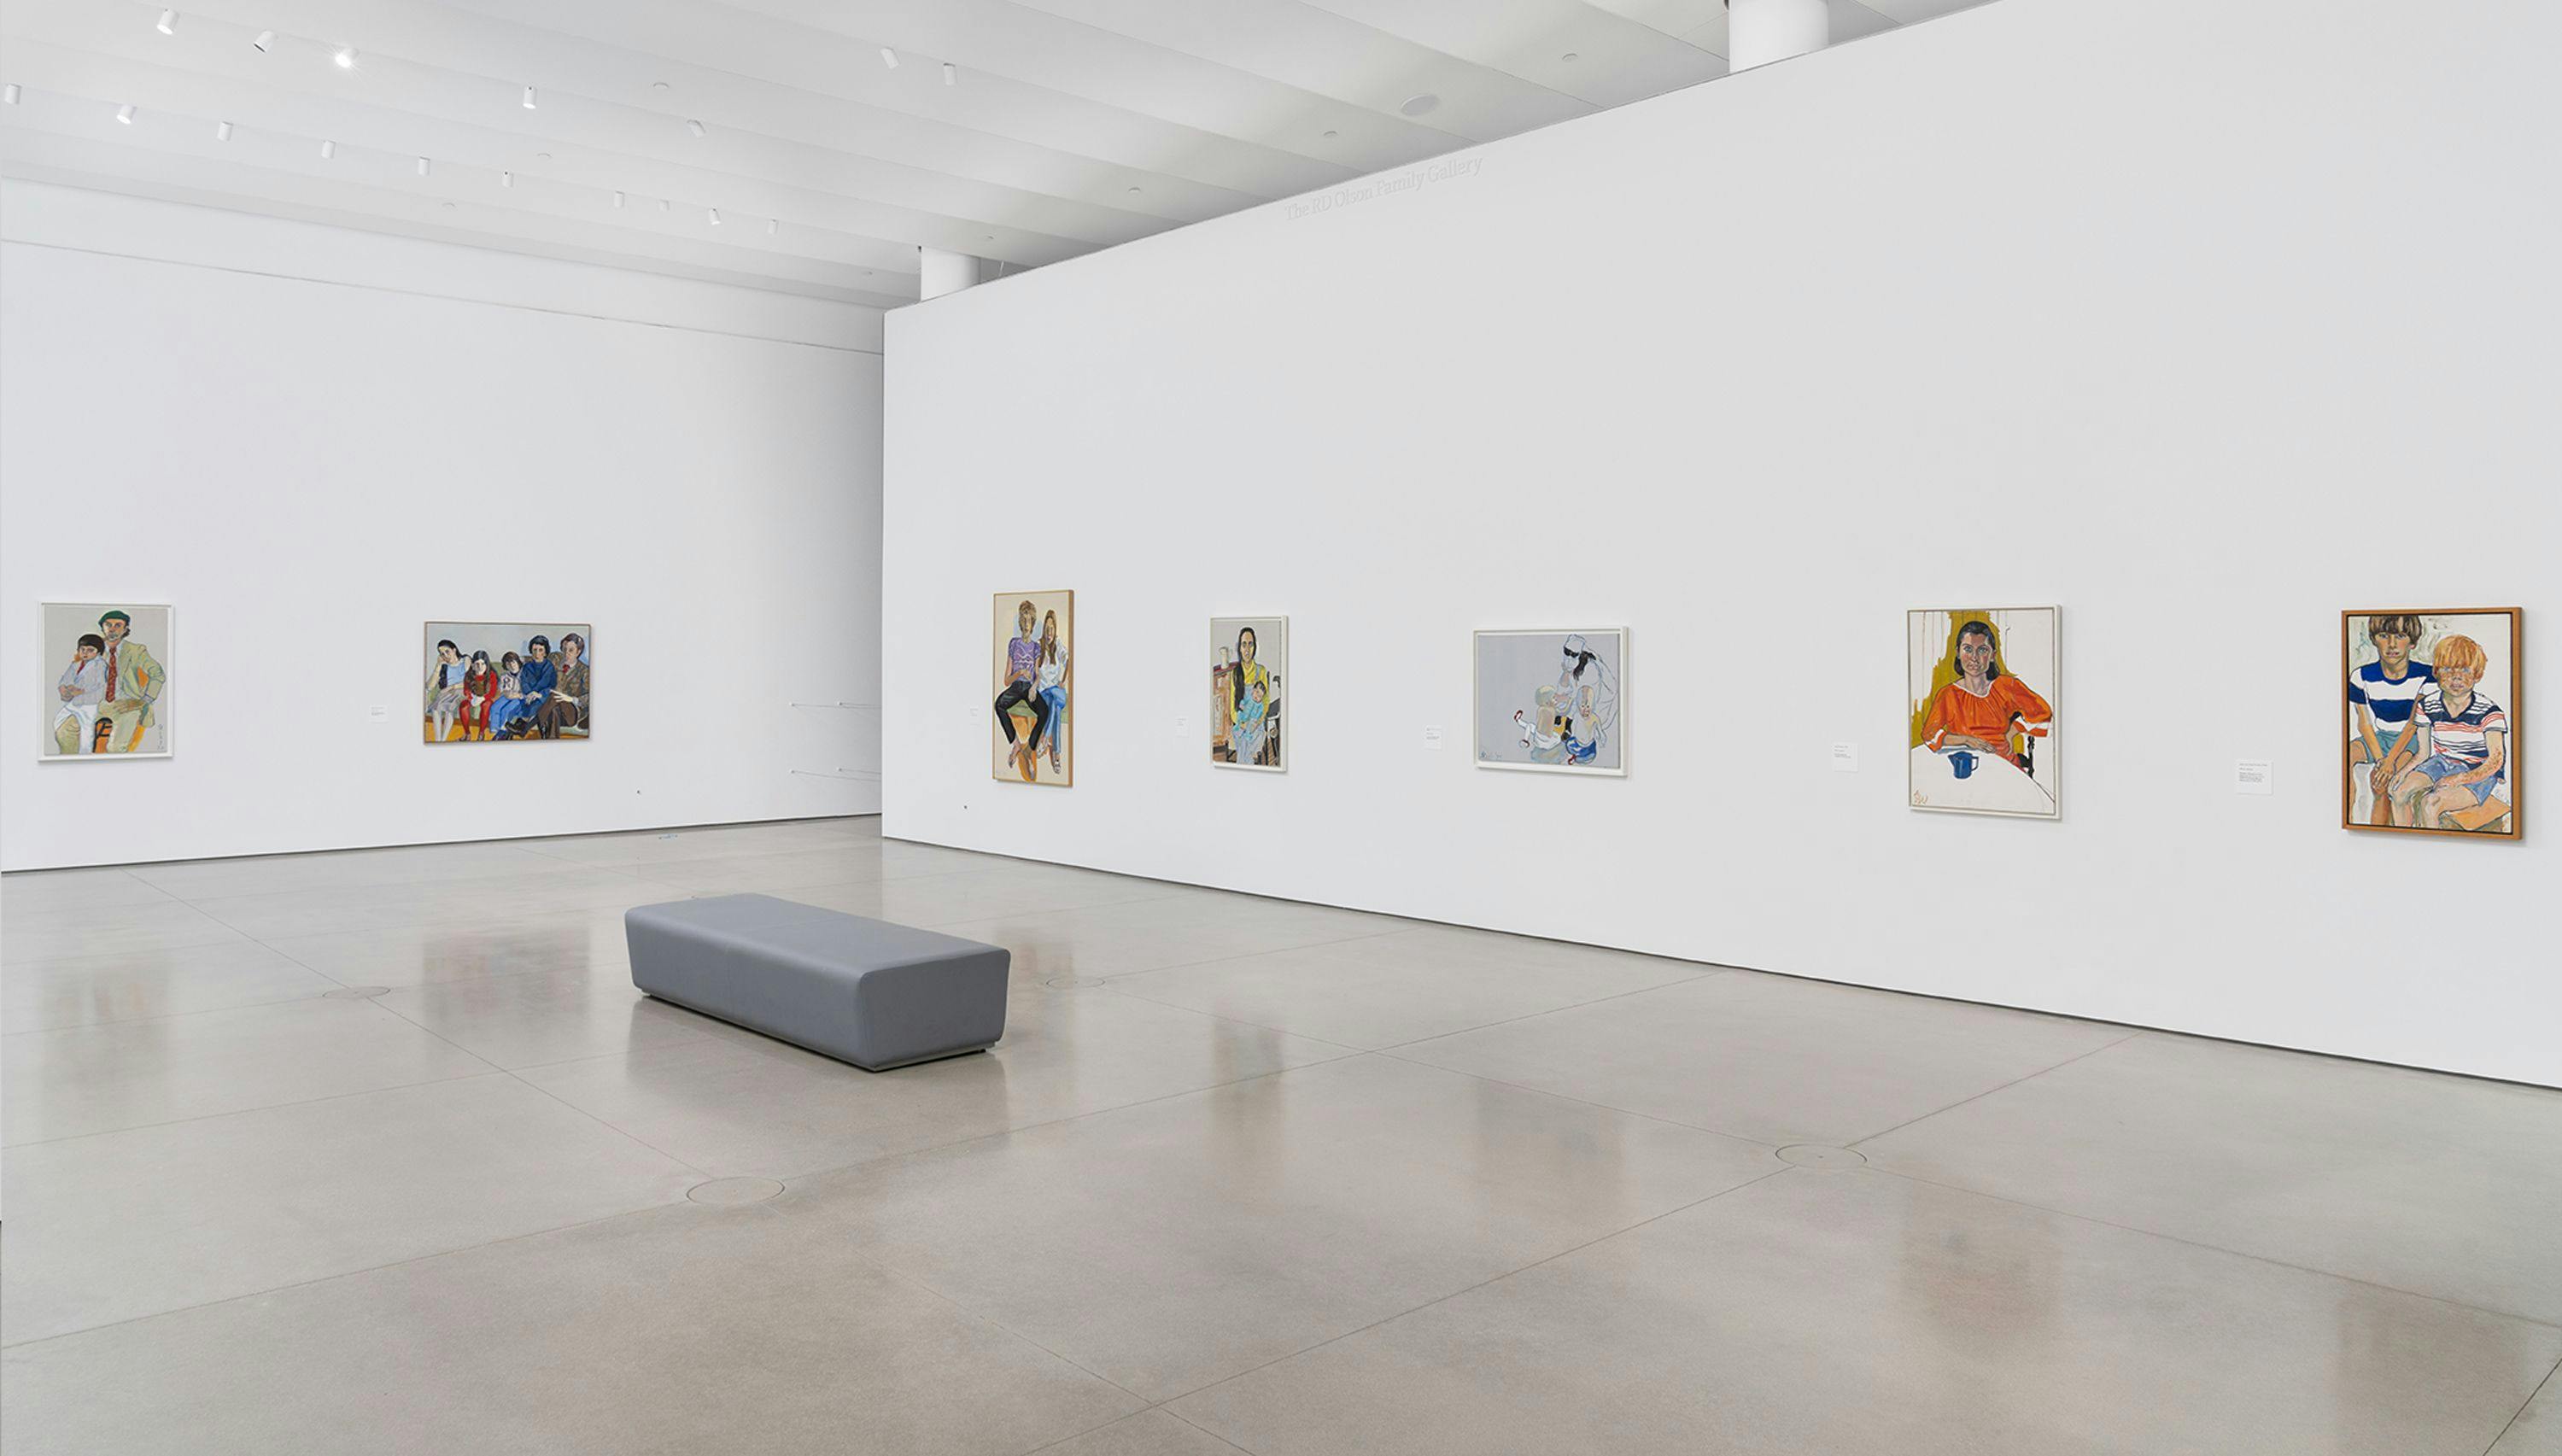 Installation view of Alice Neel: Feels Like Home, Orange County Museum of Art, 2023. Photo by Yubo Dong, ofstudio